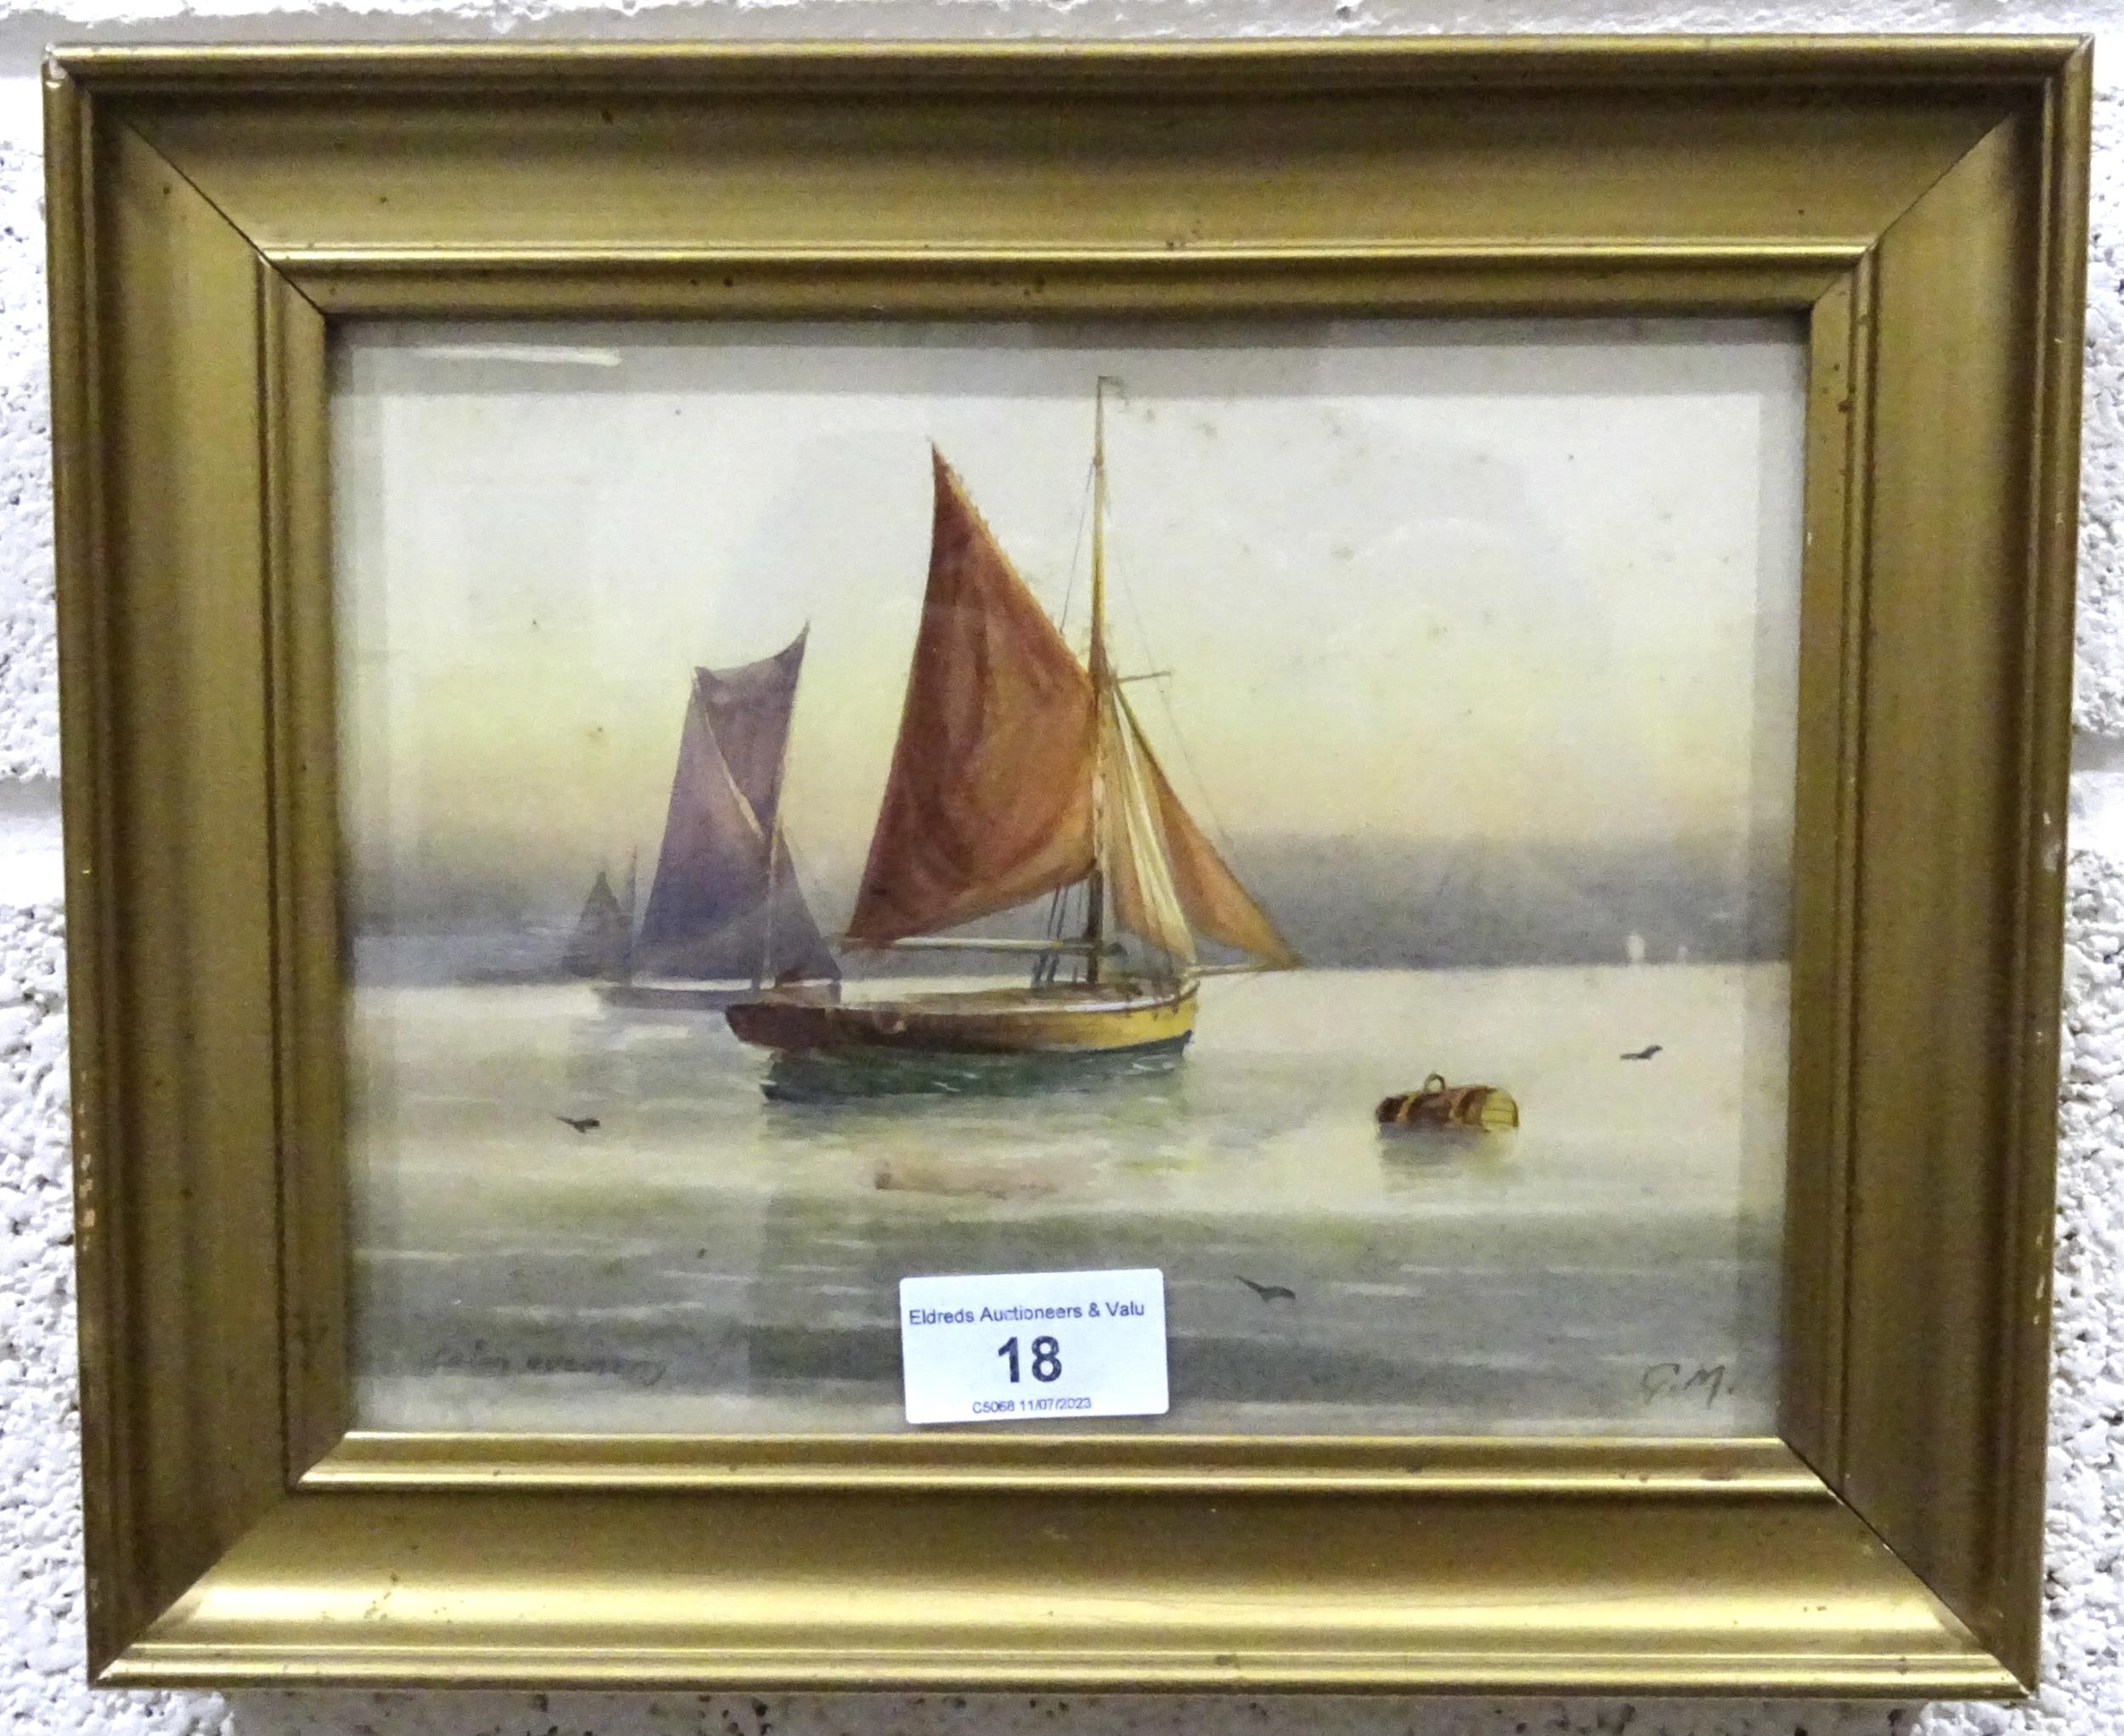 E.E.N, 'Fishing vessels with buoy in foreground', oil on canvas, initialled, 20 x 53.5cm and a - Image 4 of 5